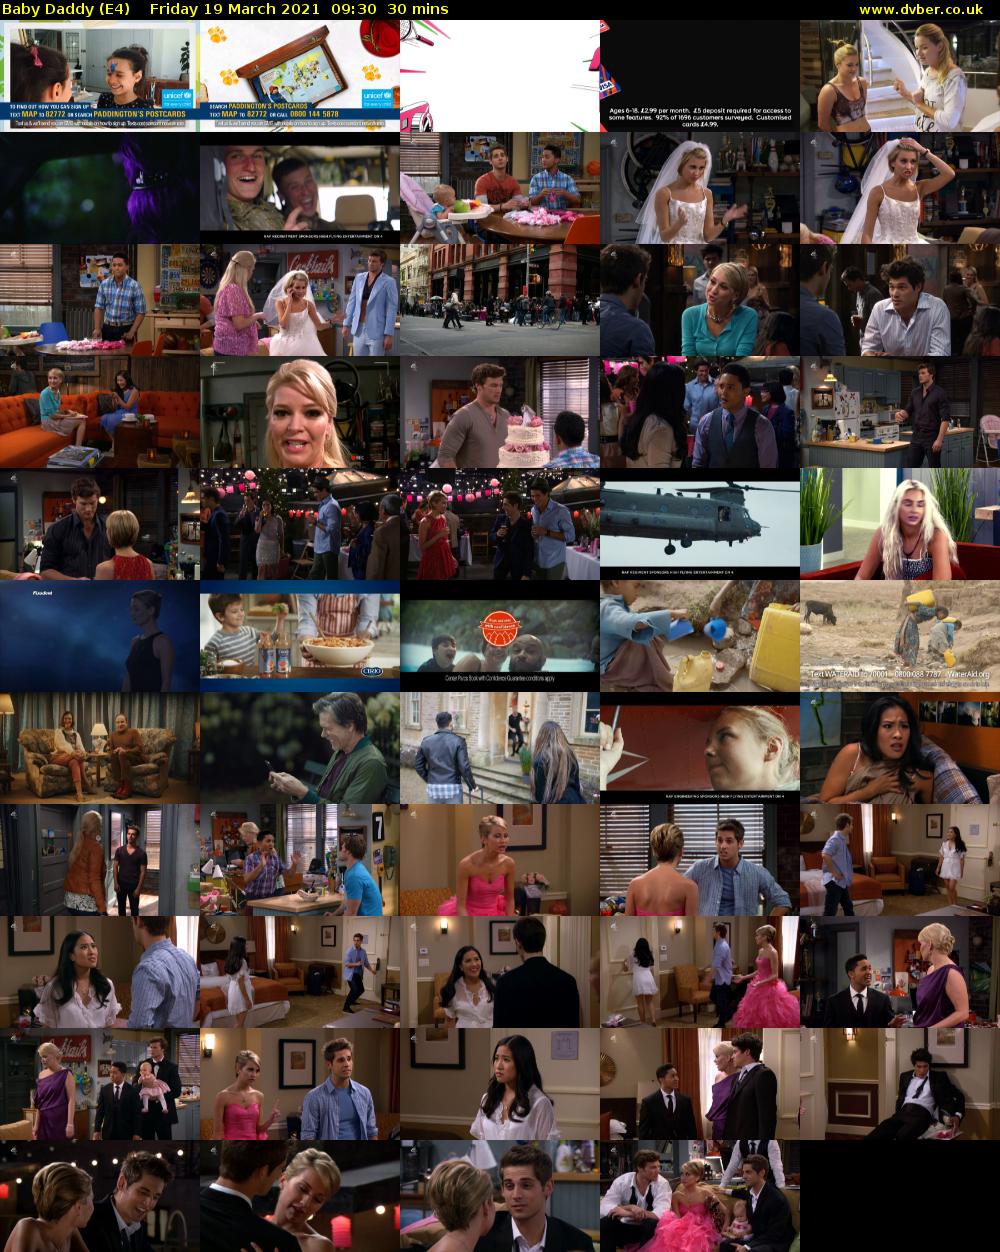 Baby Daddy (E4) Friday 19 March 2021 09:30 - 10:00